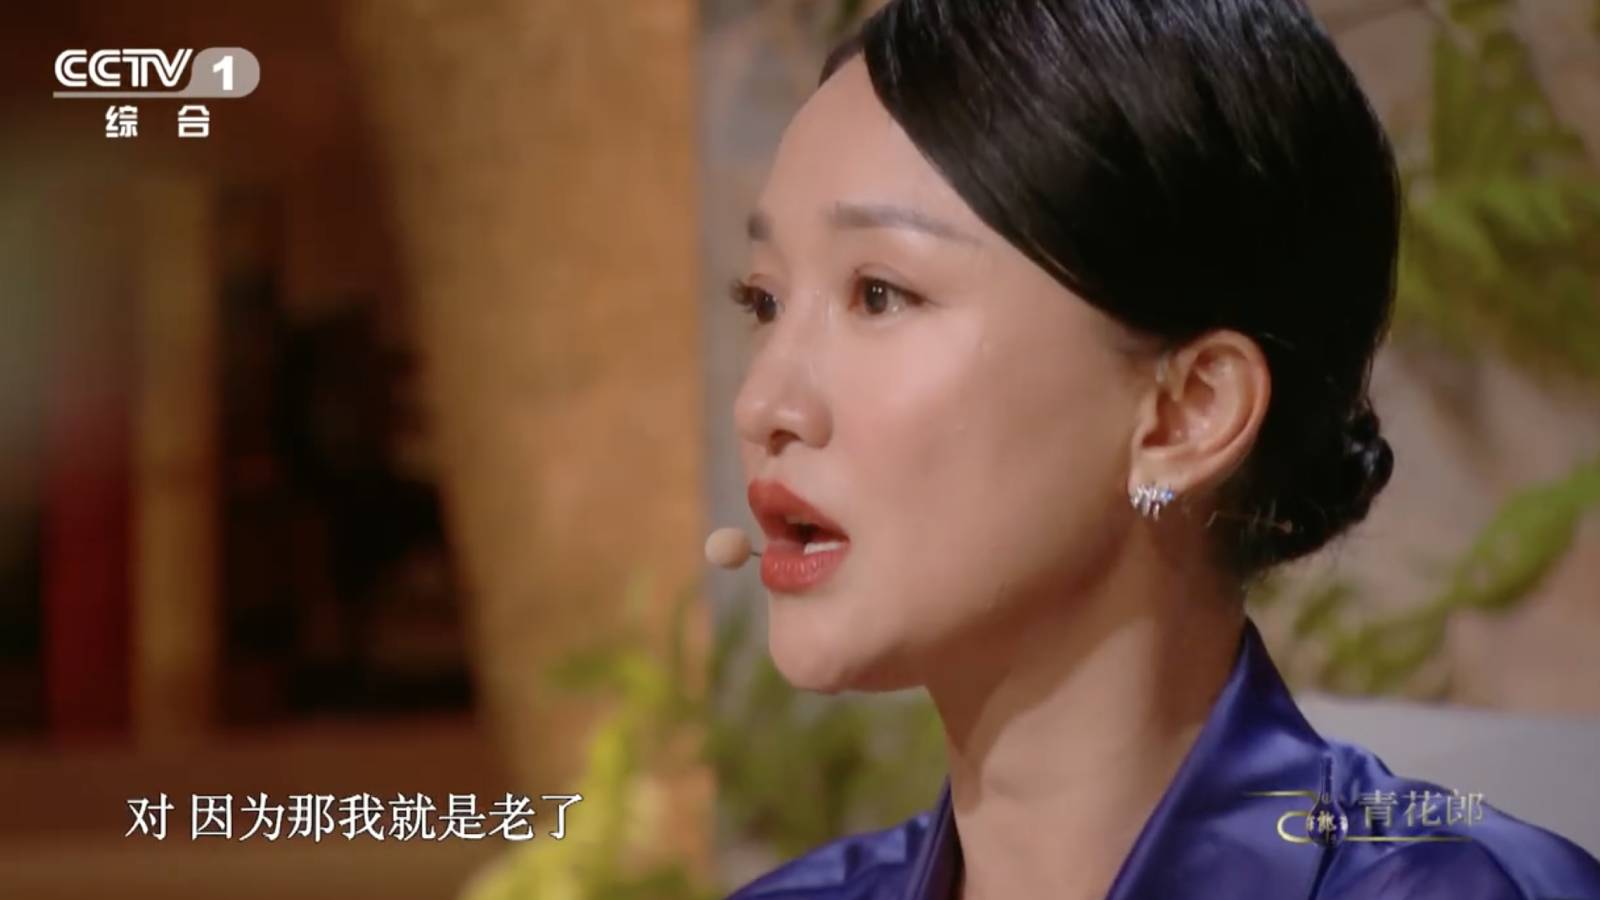 Zhou Xun got just a little teary speaking about the controversy